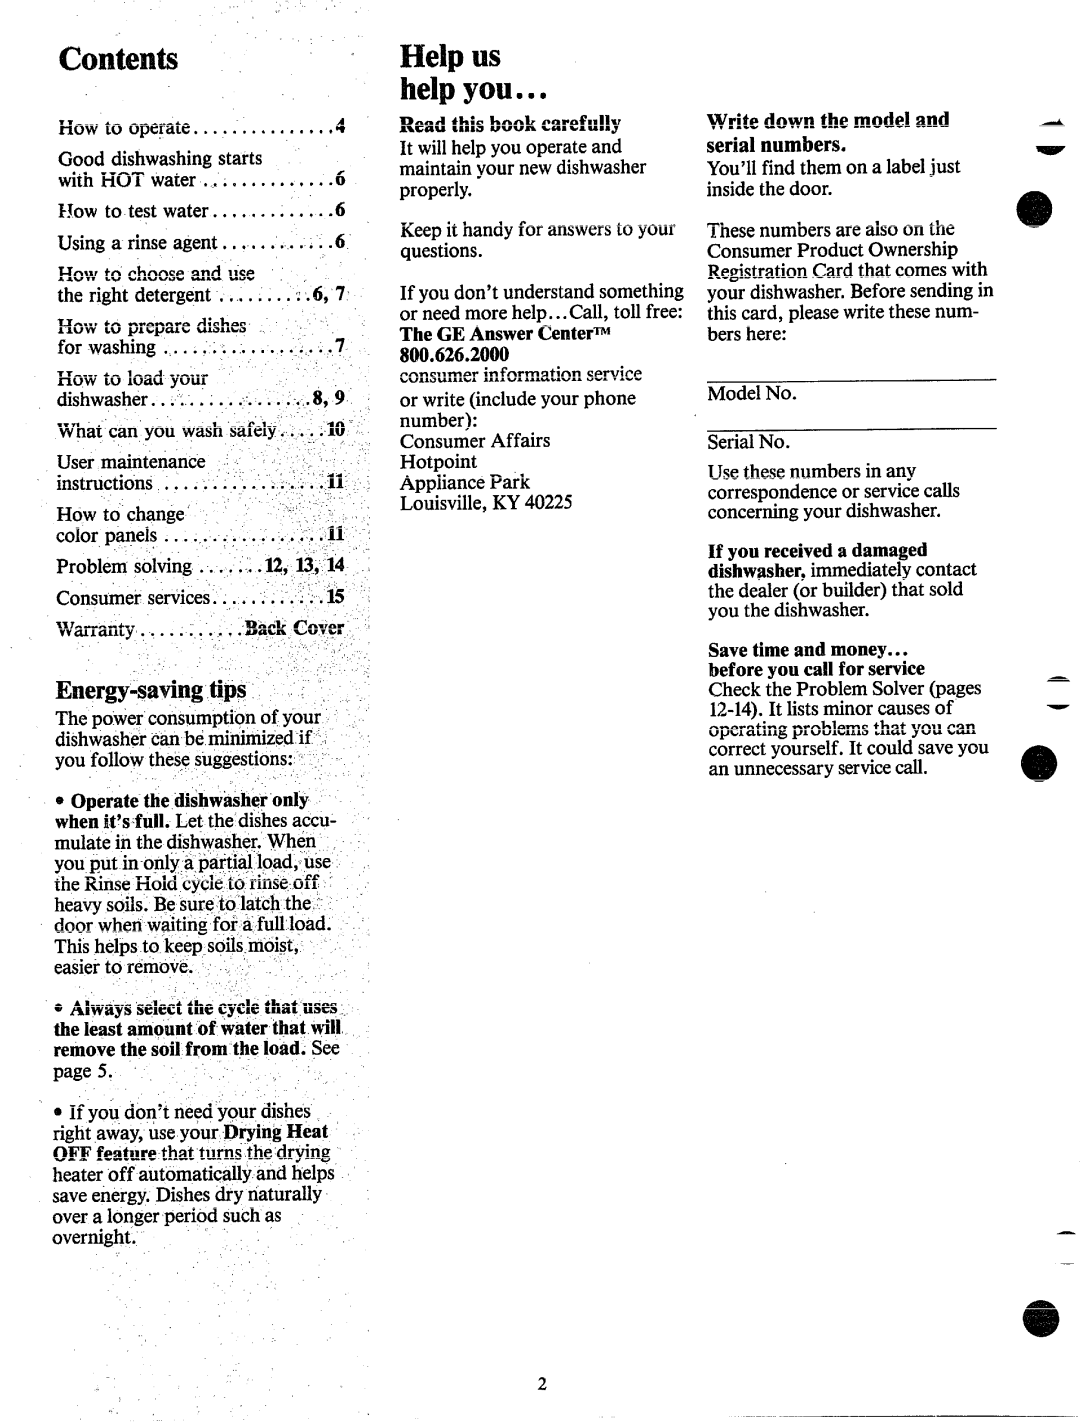 Hotpoint HDA795 manual Contenti, HelpUS helpyous, Energy-satingtips“ ~~‘, Readthisbook carefully 